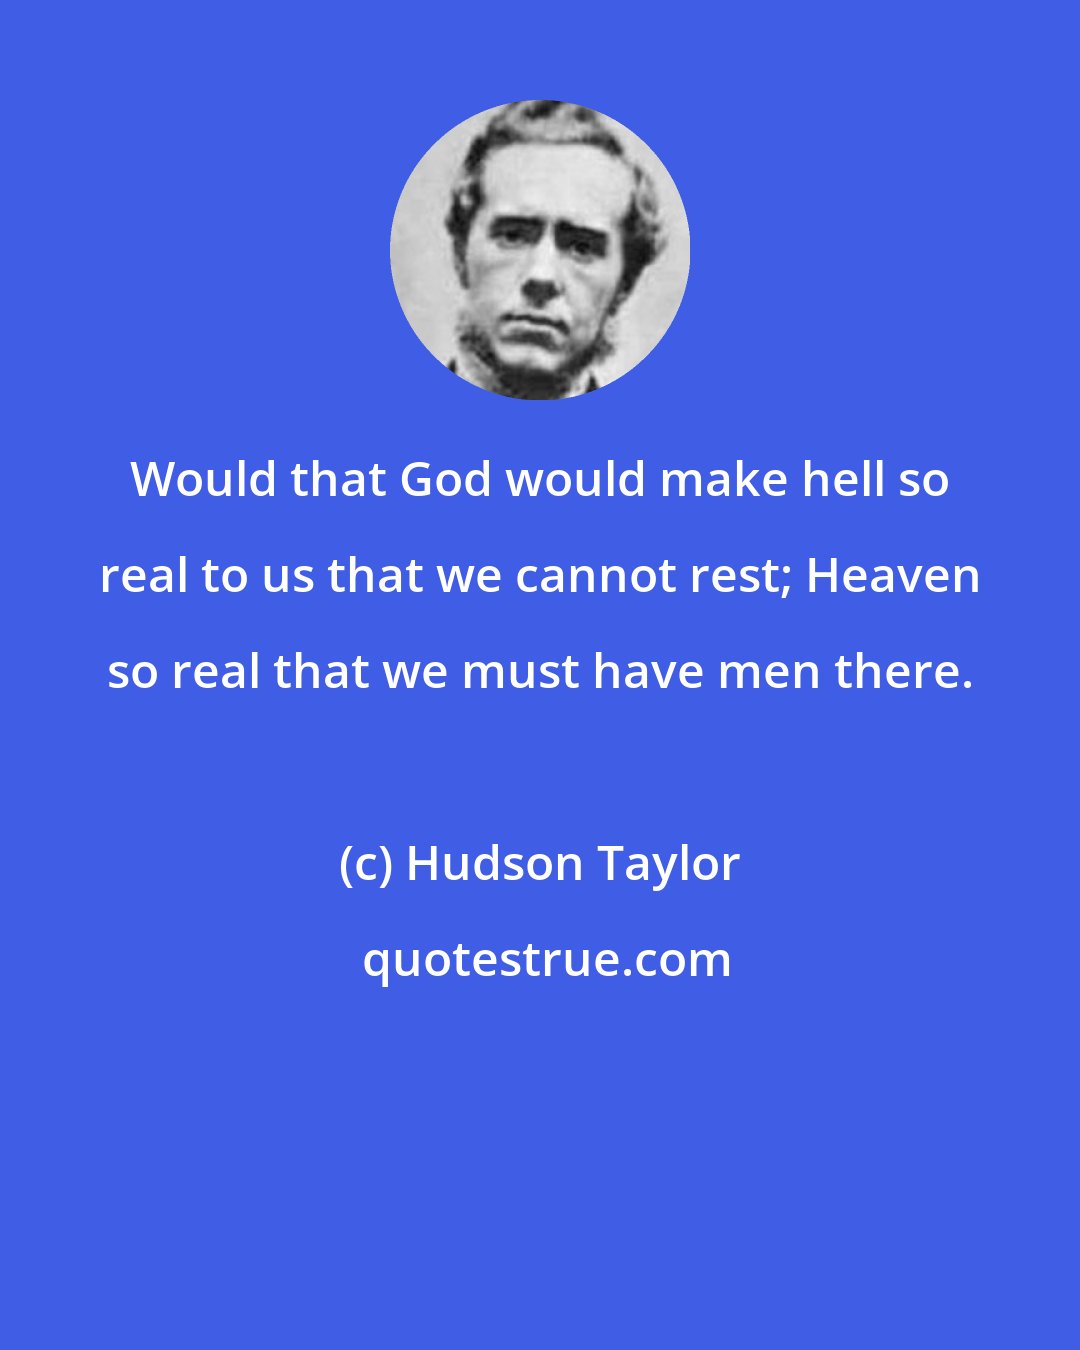 Hudson Taylor: Would that God would make hell so real to us that we cannot rest; Heaven so real that we must have men there.